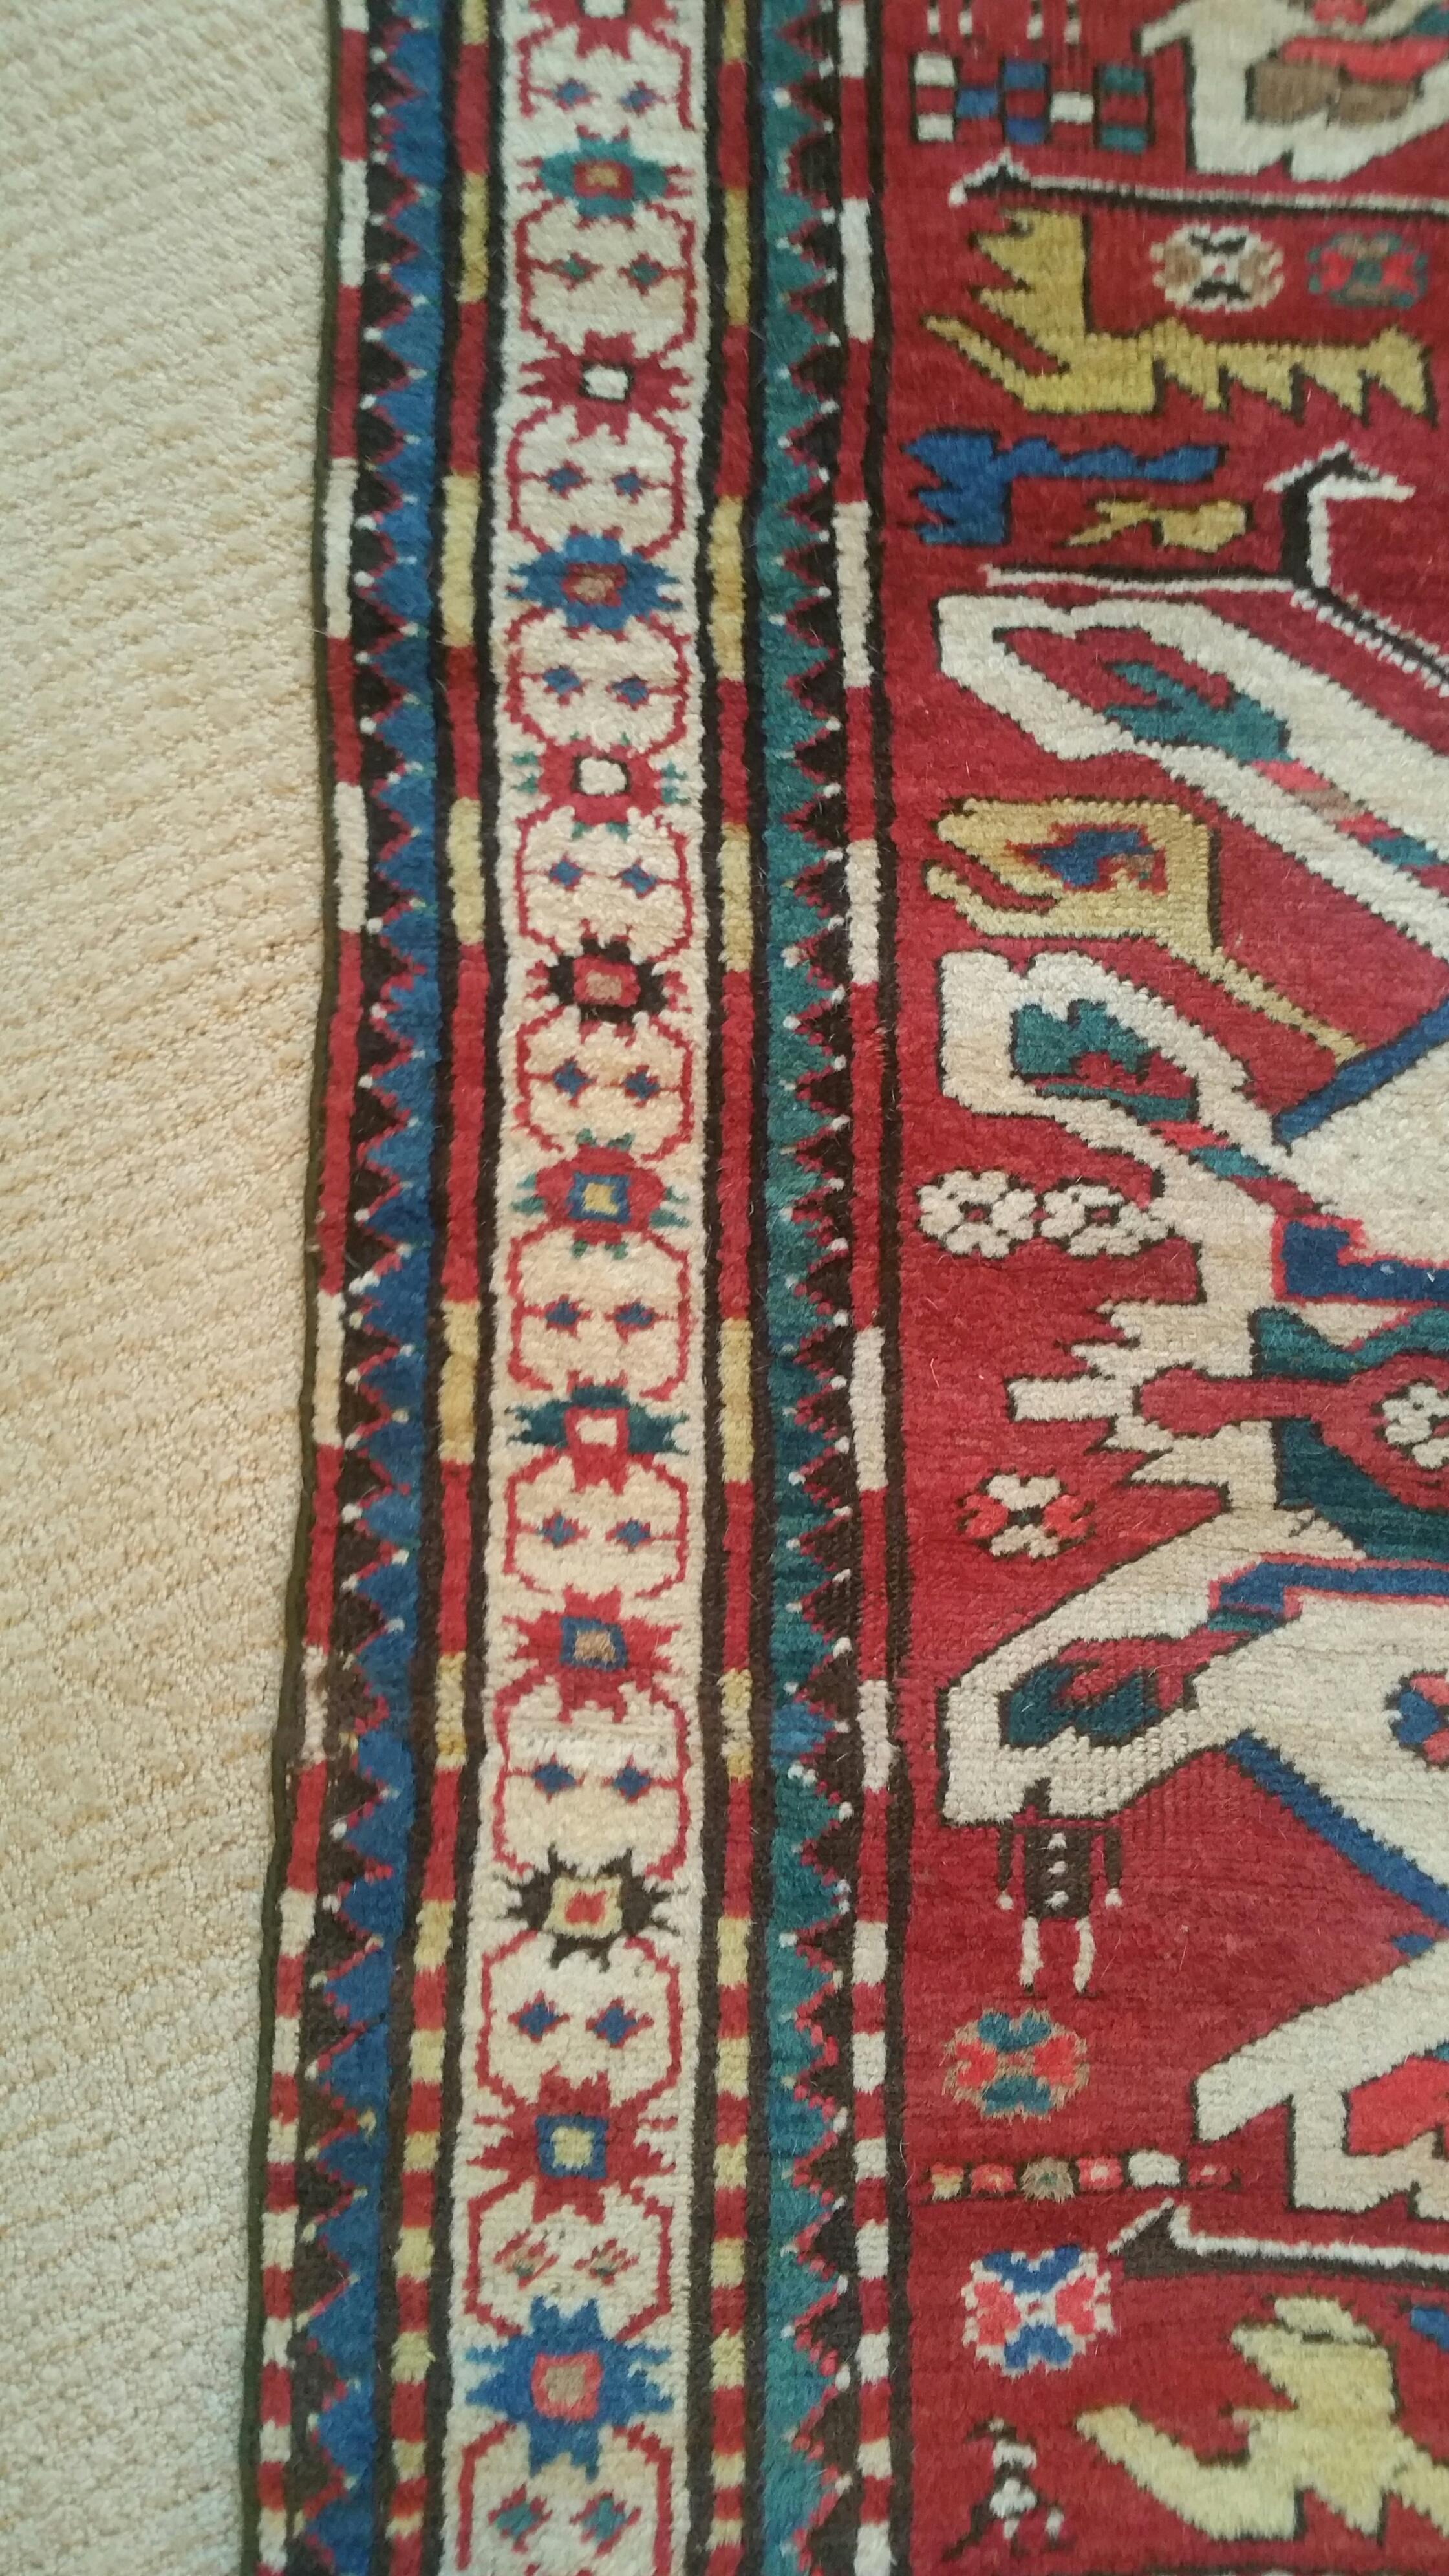 Late 19th Century Eagle Kazak Chelaberd Wool Rug Carpet In Good Condition For Sale In Jersey City, NJ